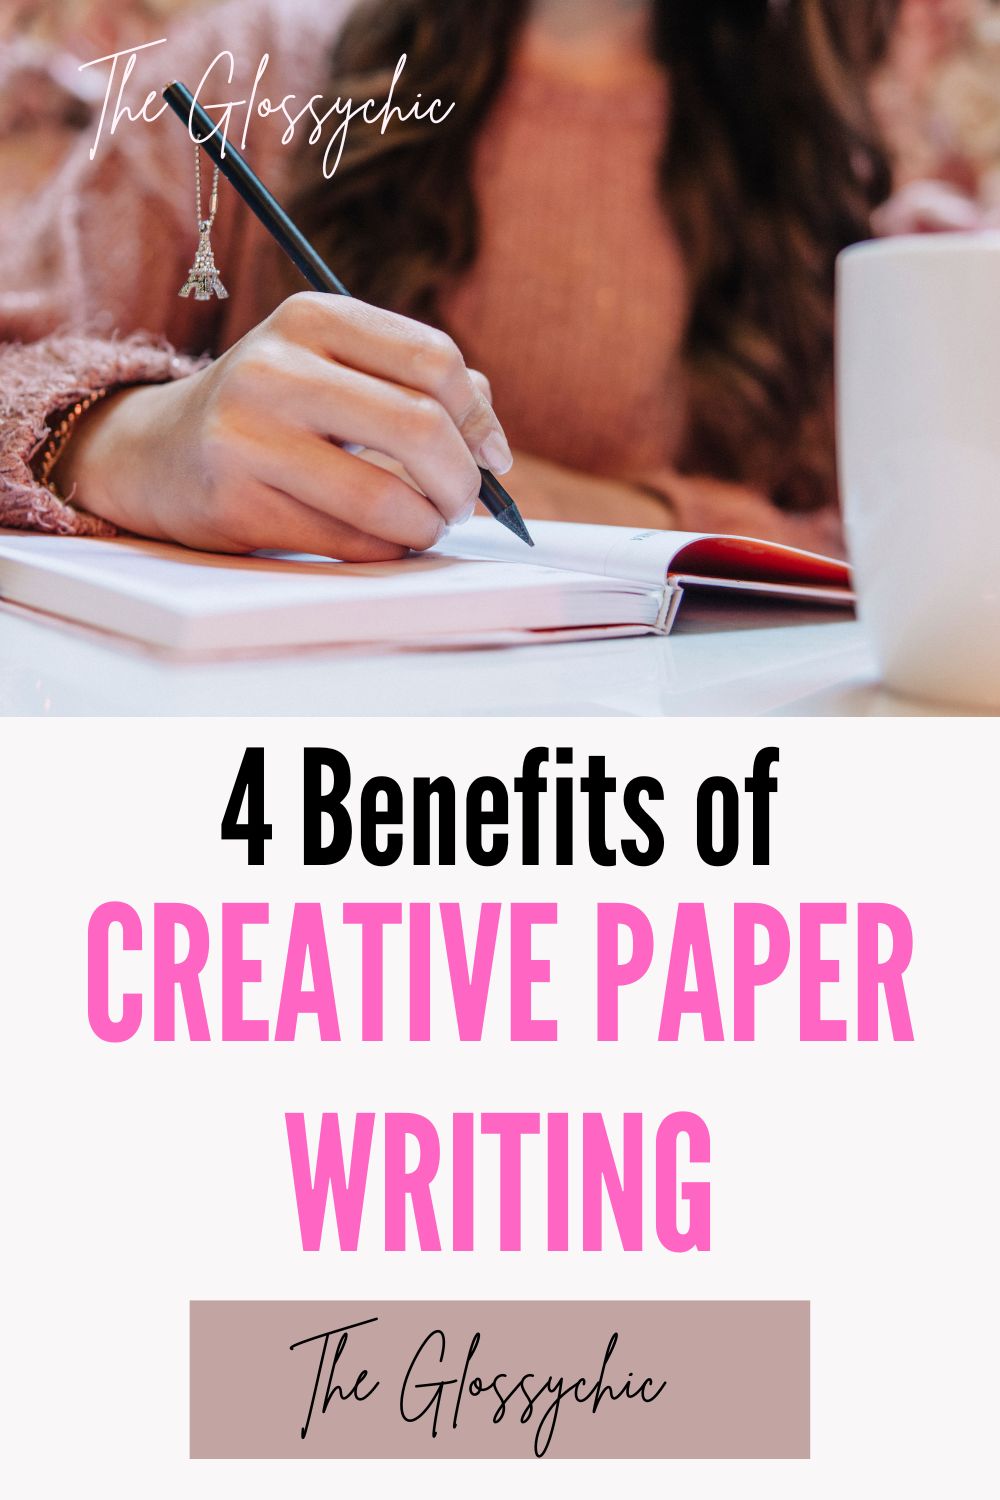 Benefits of creative paper writing